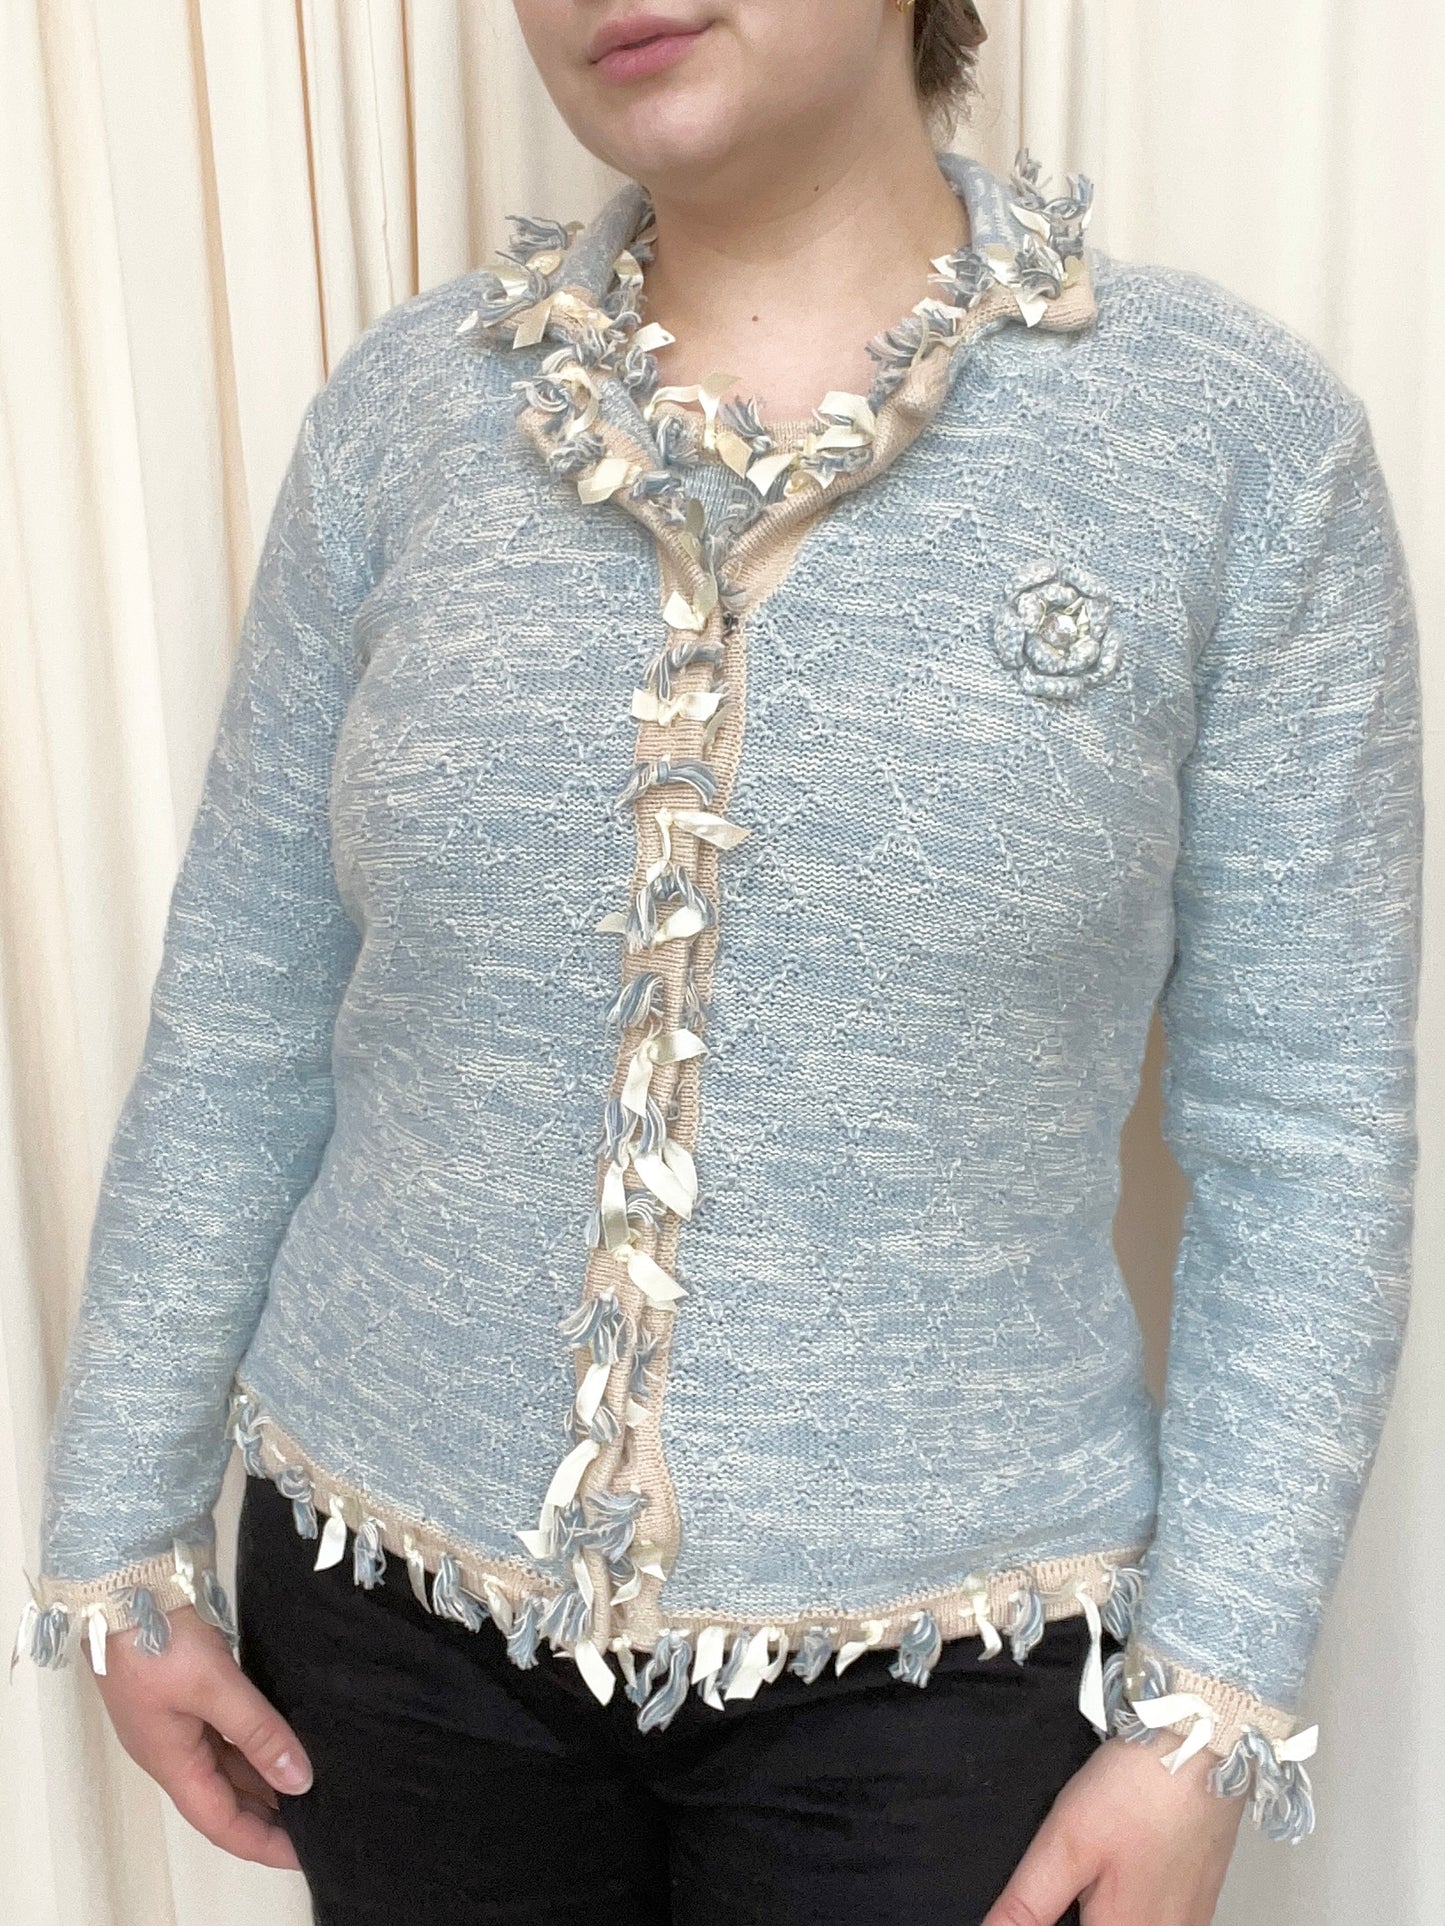 Vintage Blue Ribbon Sweater - Small